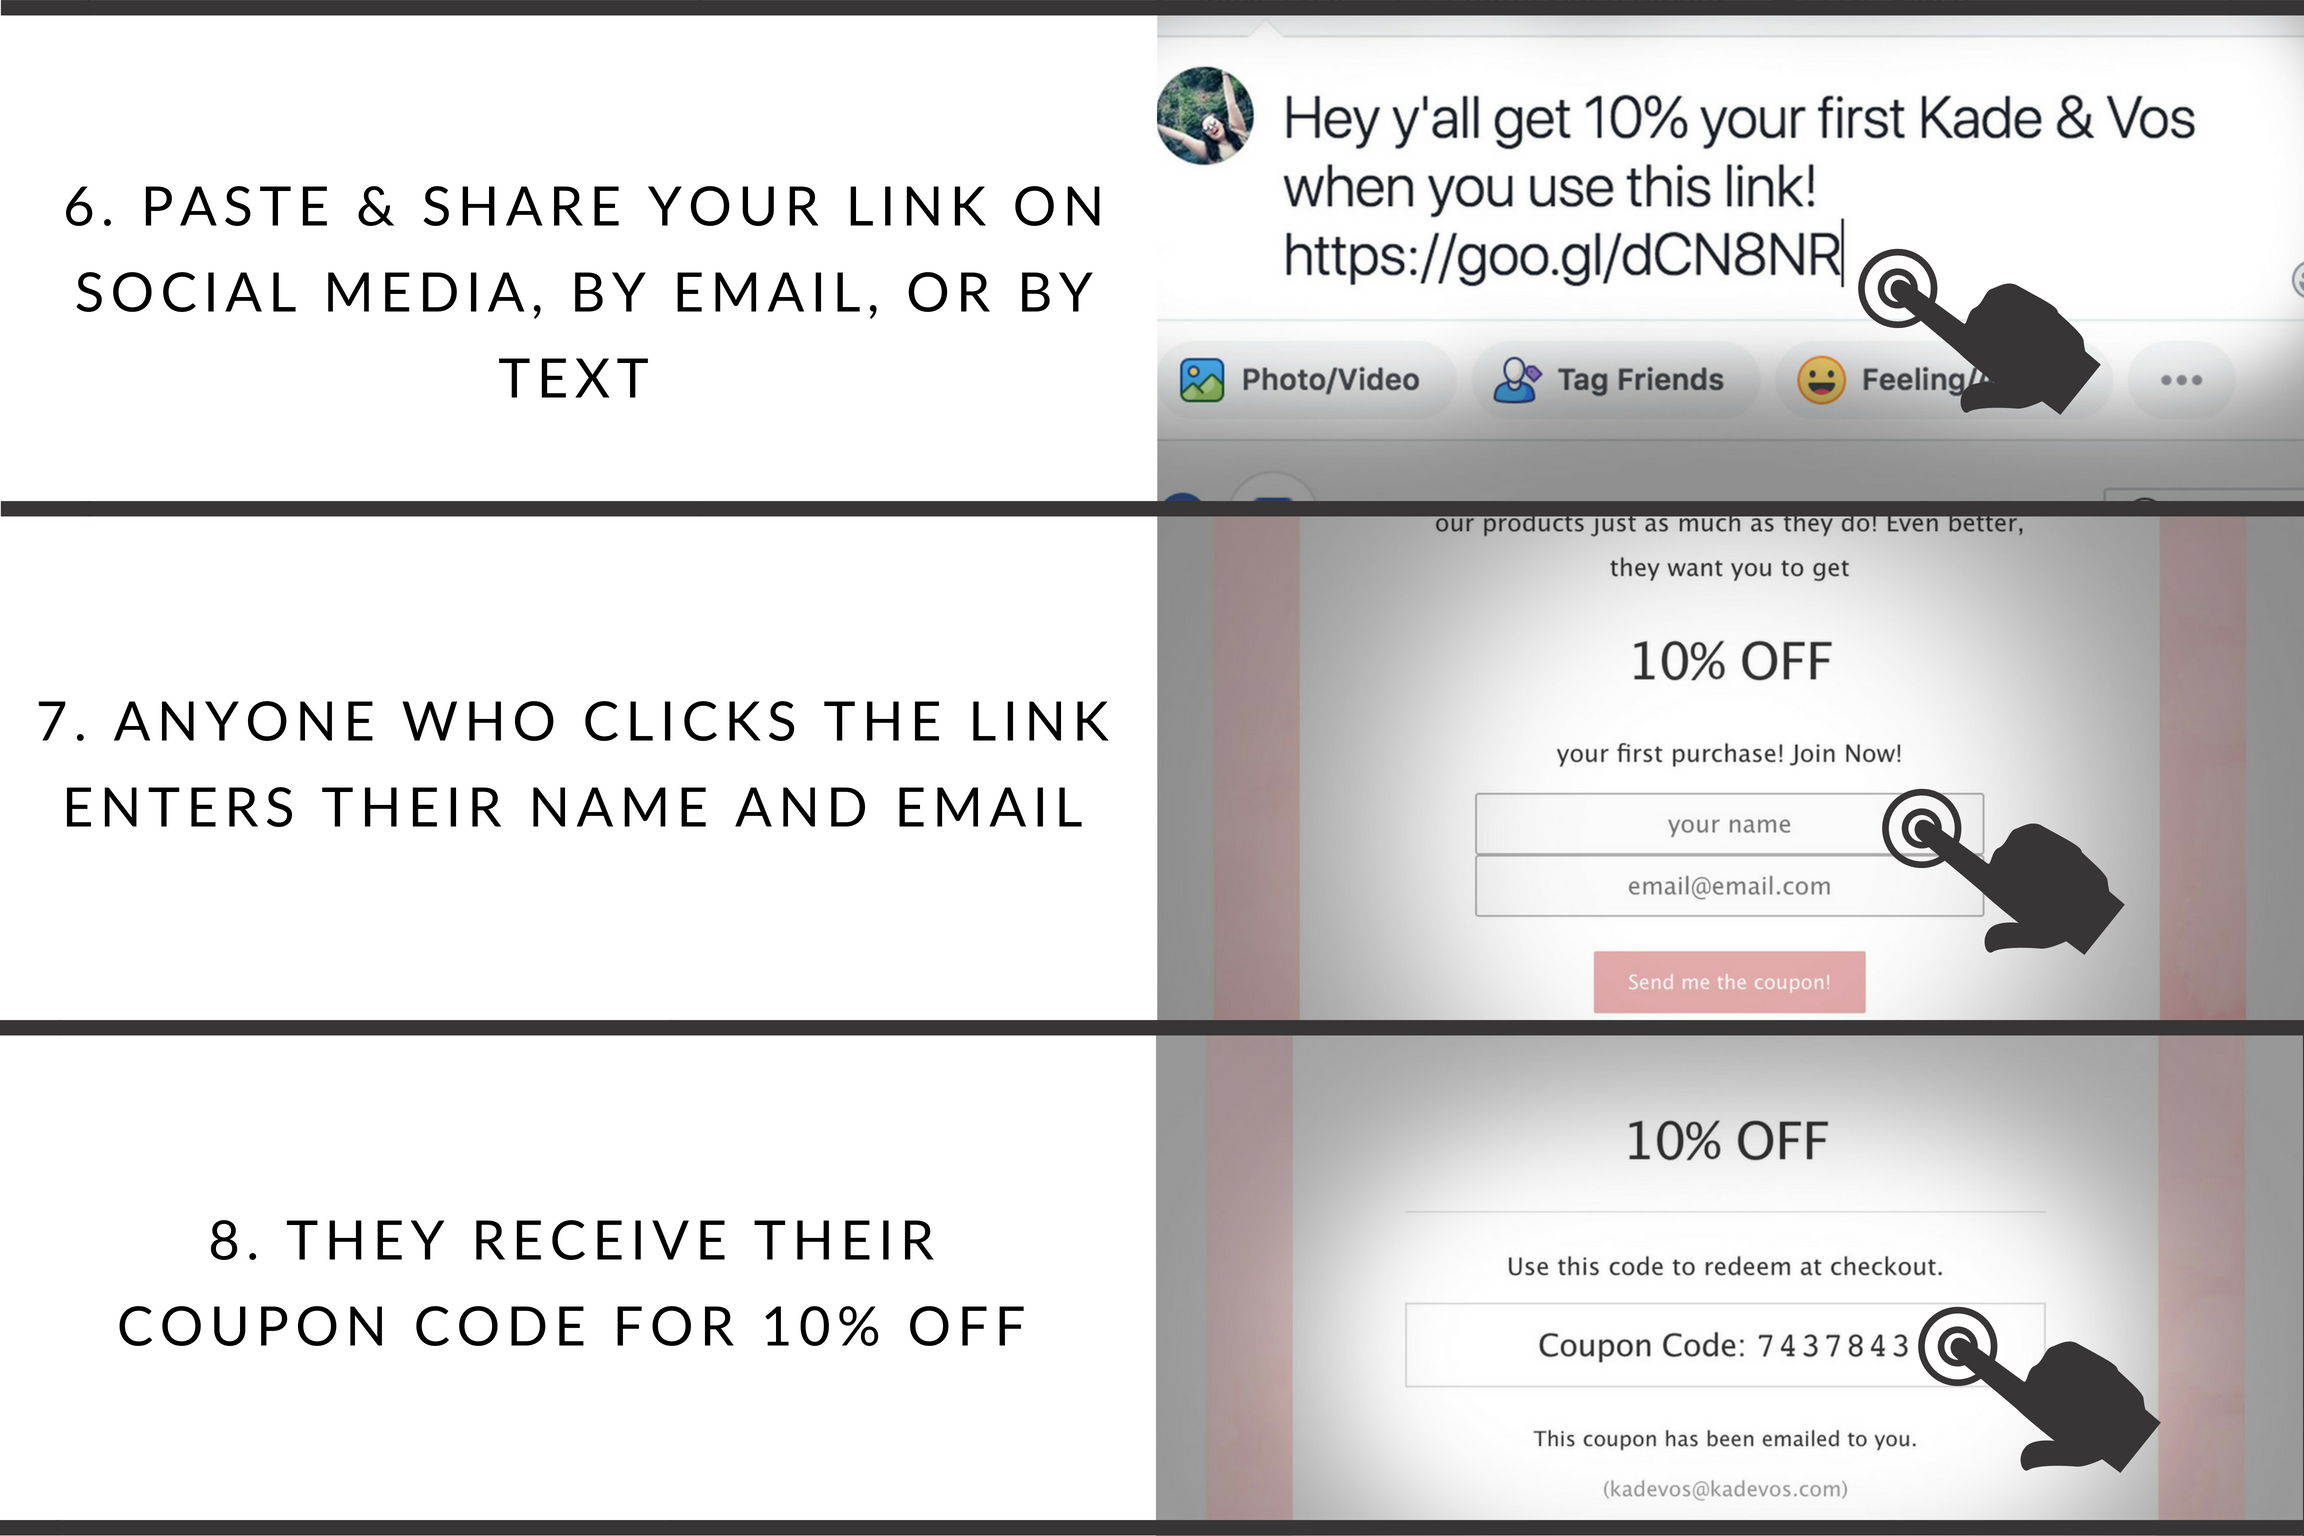 6. paste and share your link on social media, by email, or by text 7. anyone who clicks the link enters their name and email address 8. they receive their coupon code for 10% off